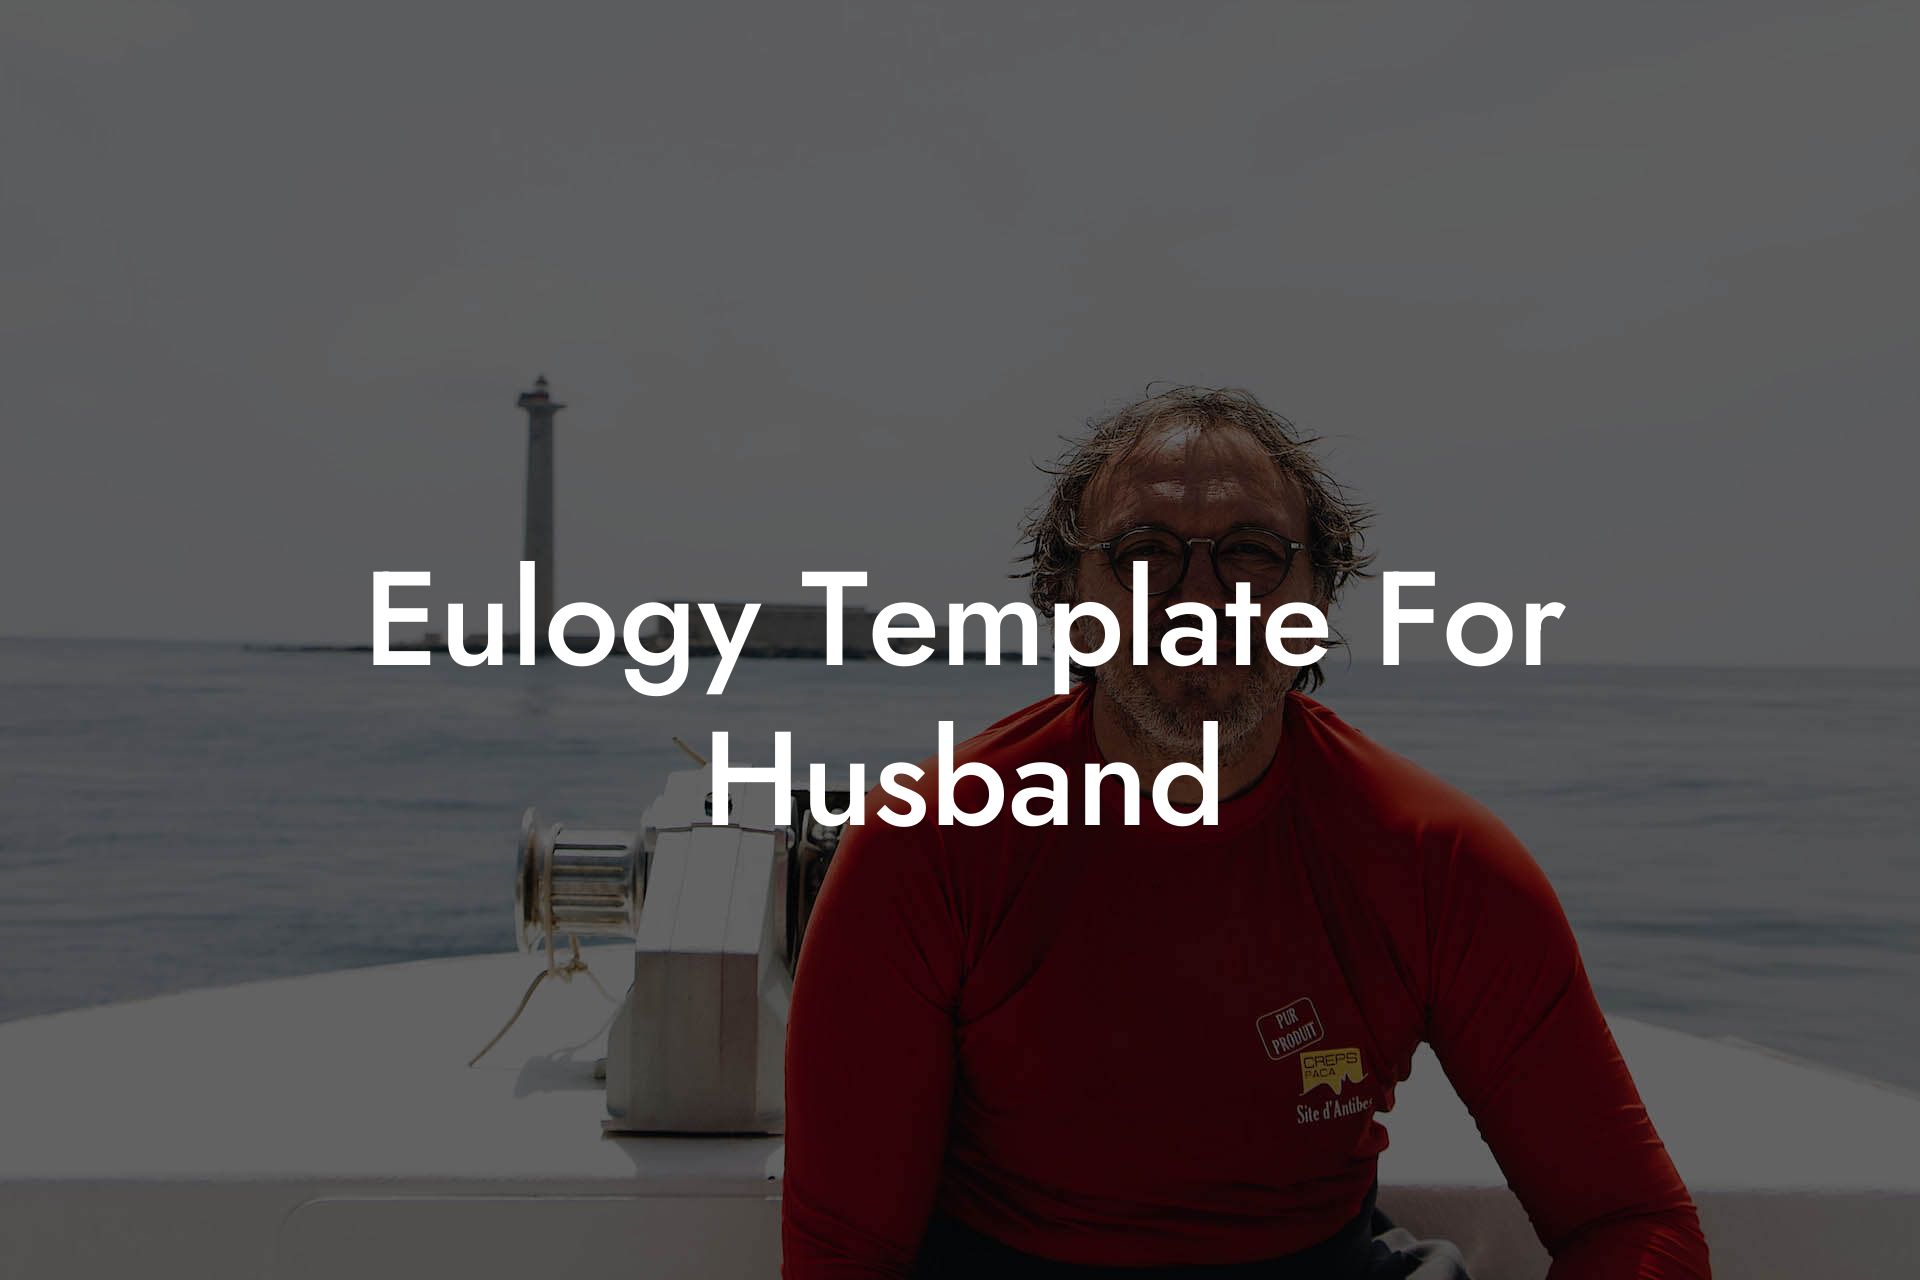 Eulogy Template For Husband